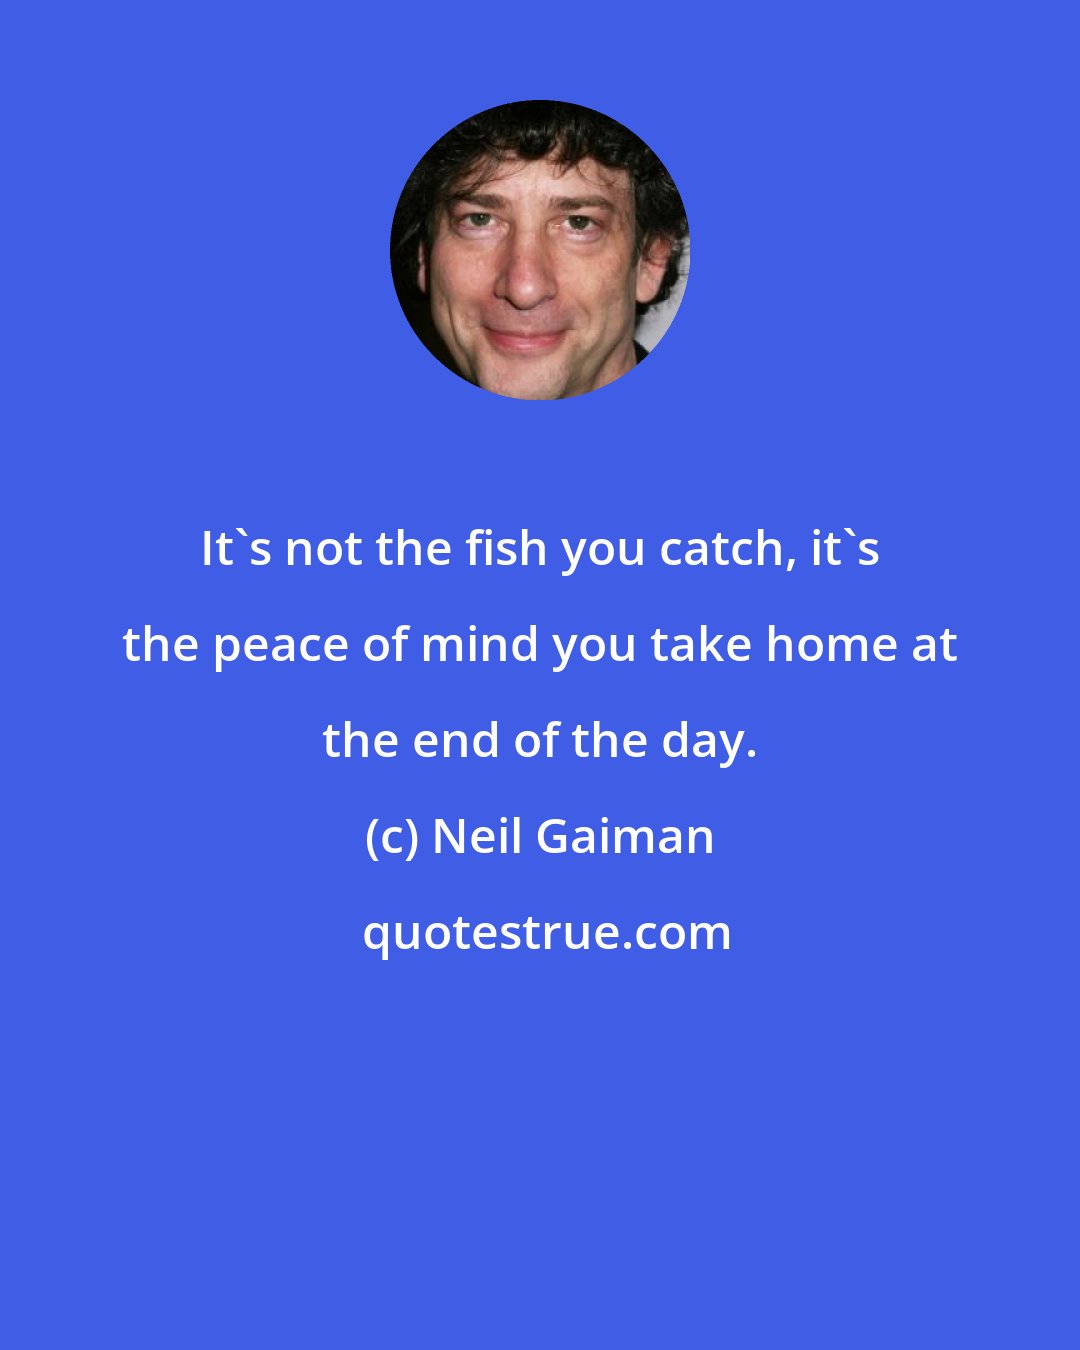 Neil Gaiman: It's not the fish you catch, it's the peace of mind you take home at the end of the day.